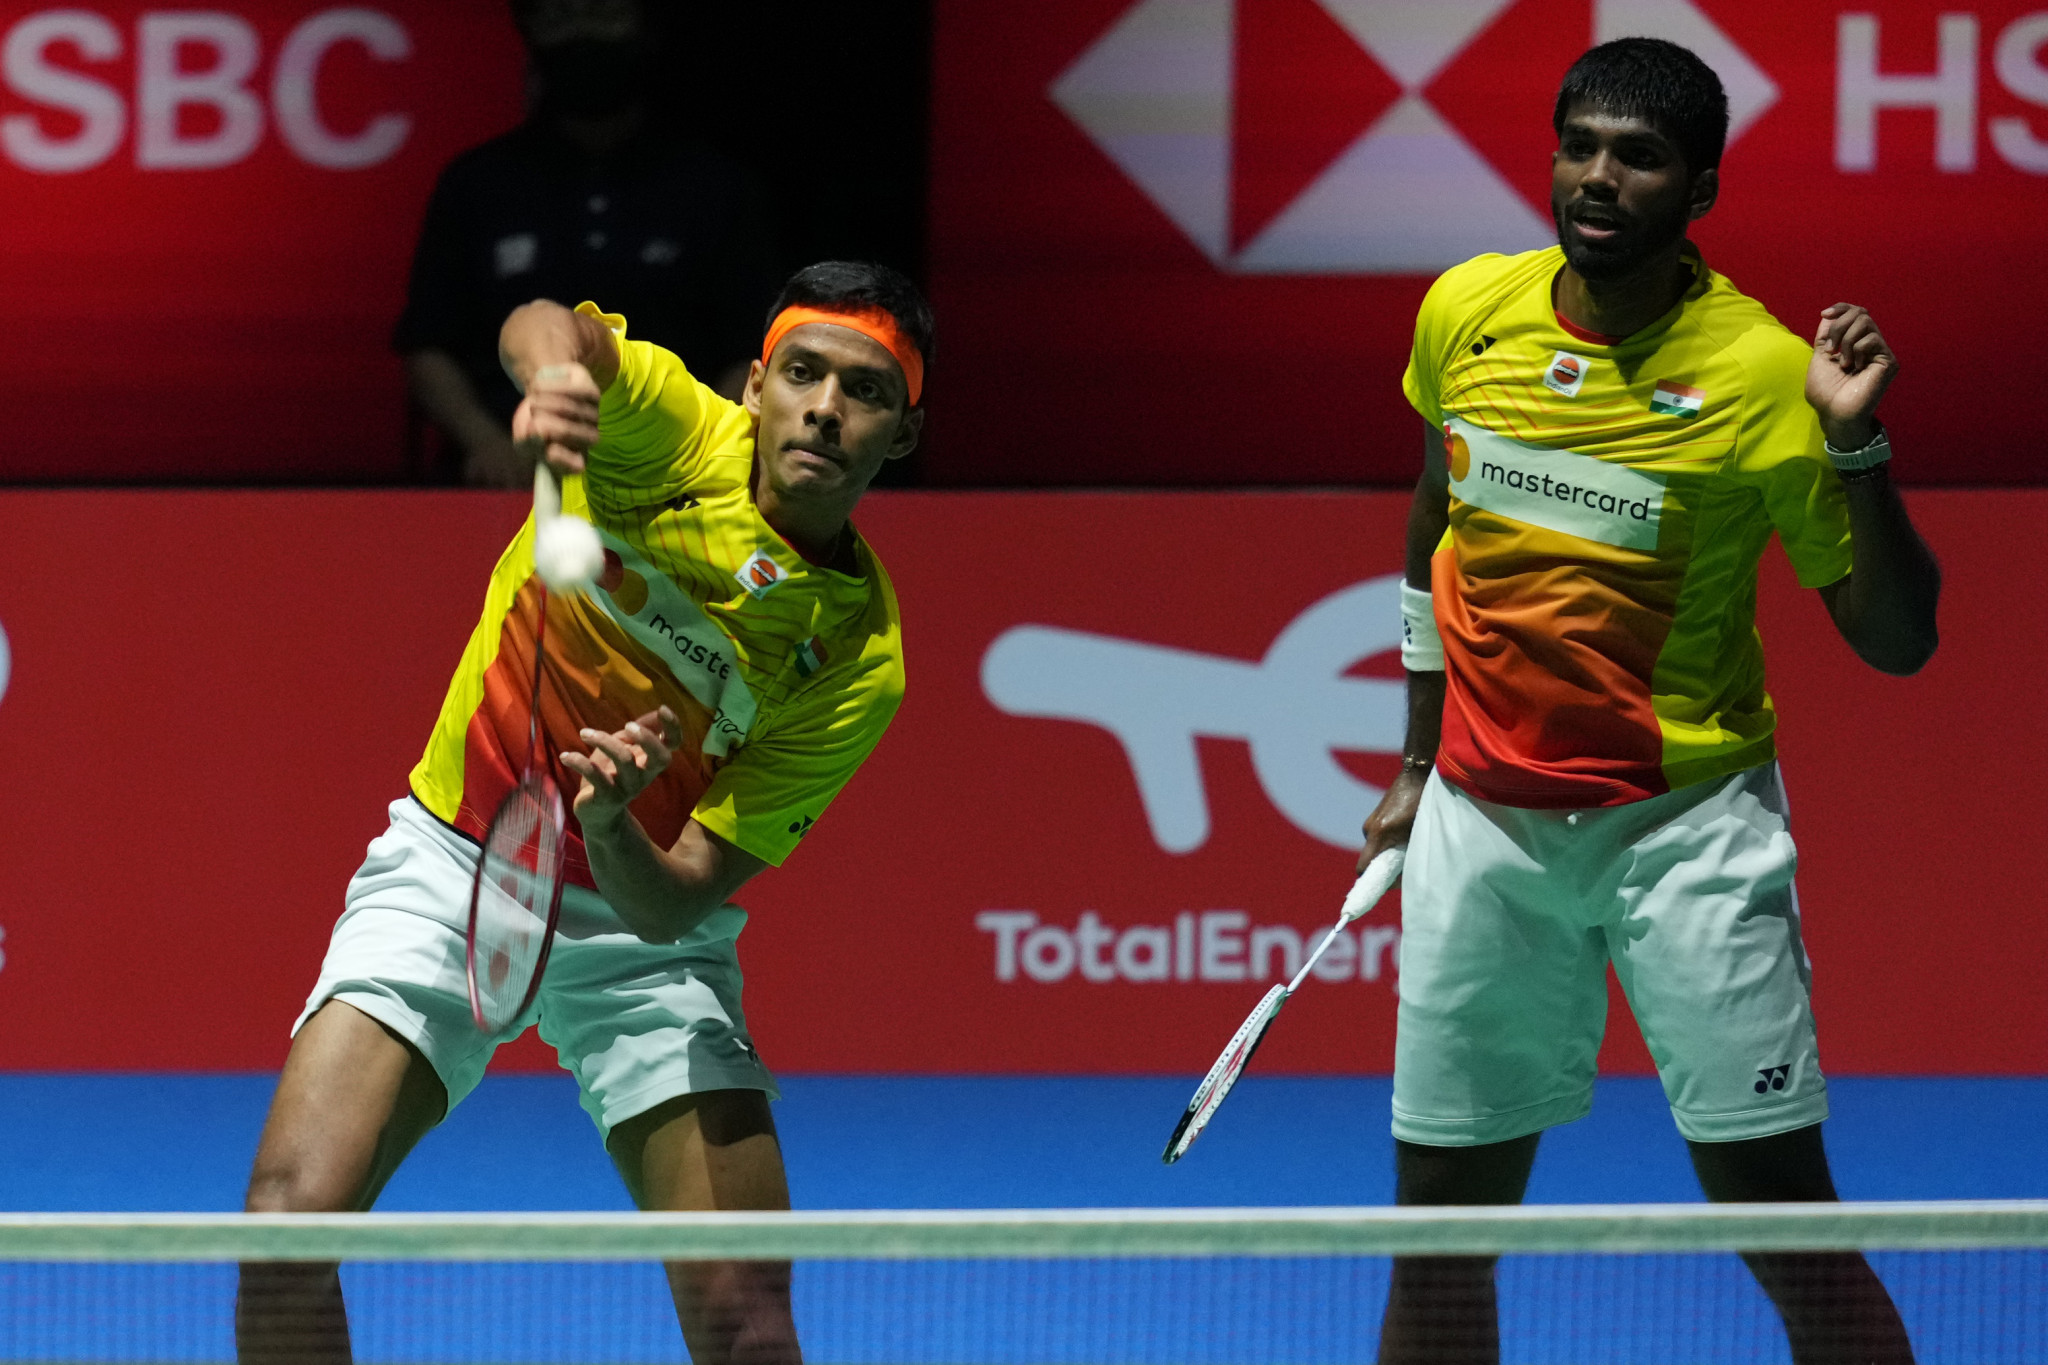 Rankireddy and Shetty won five titles as a pairing this year ©Getty Images